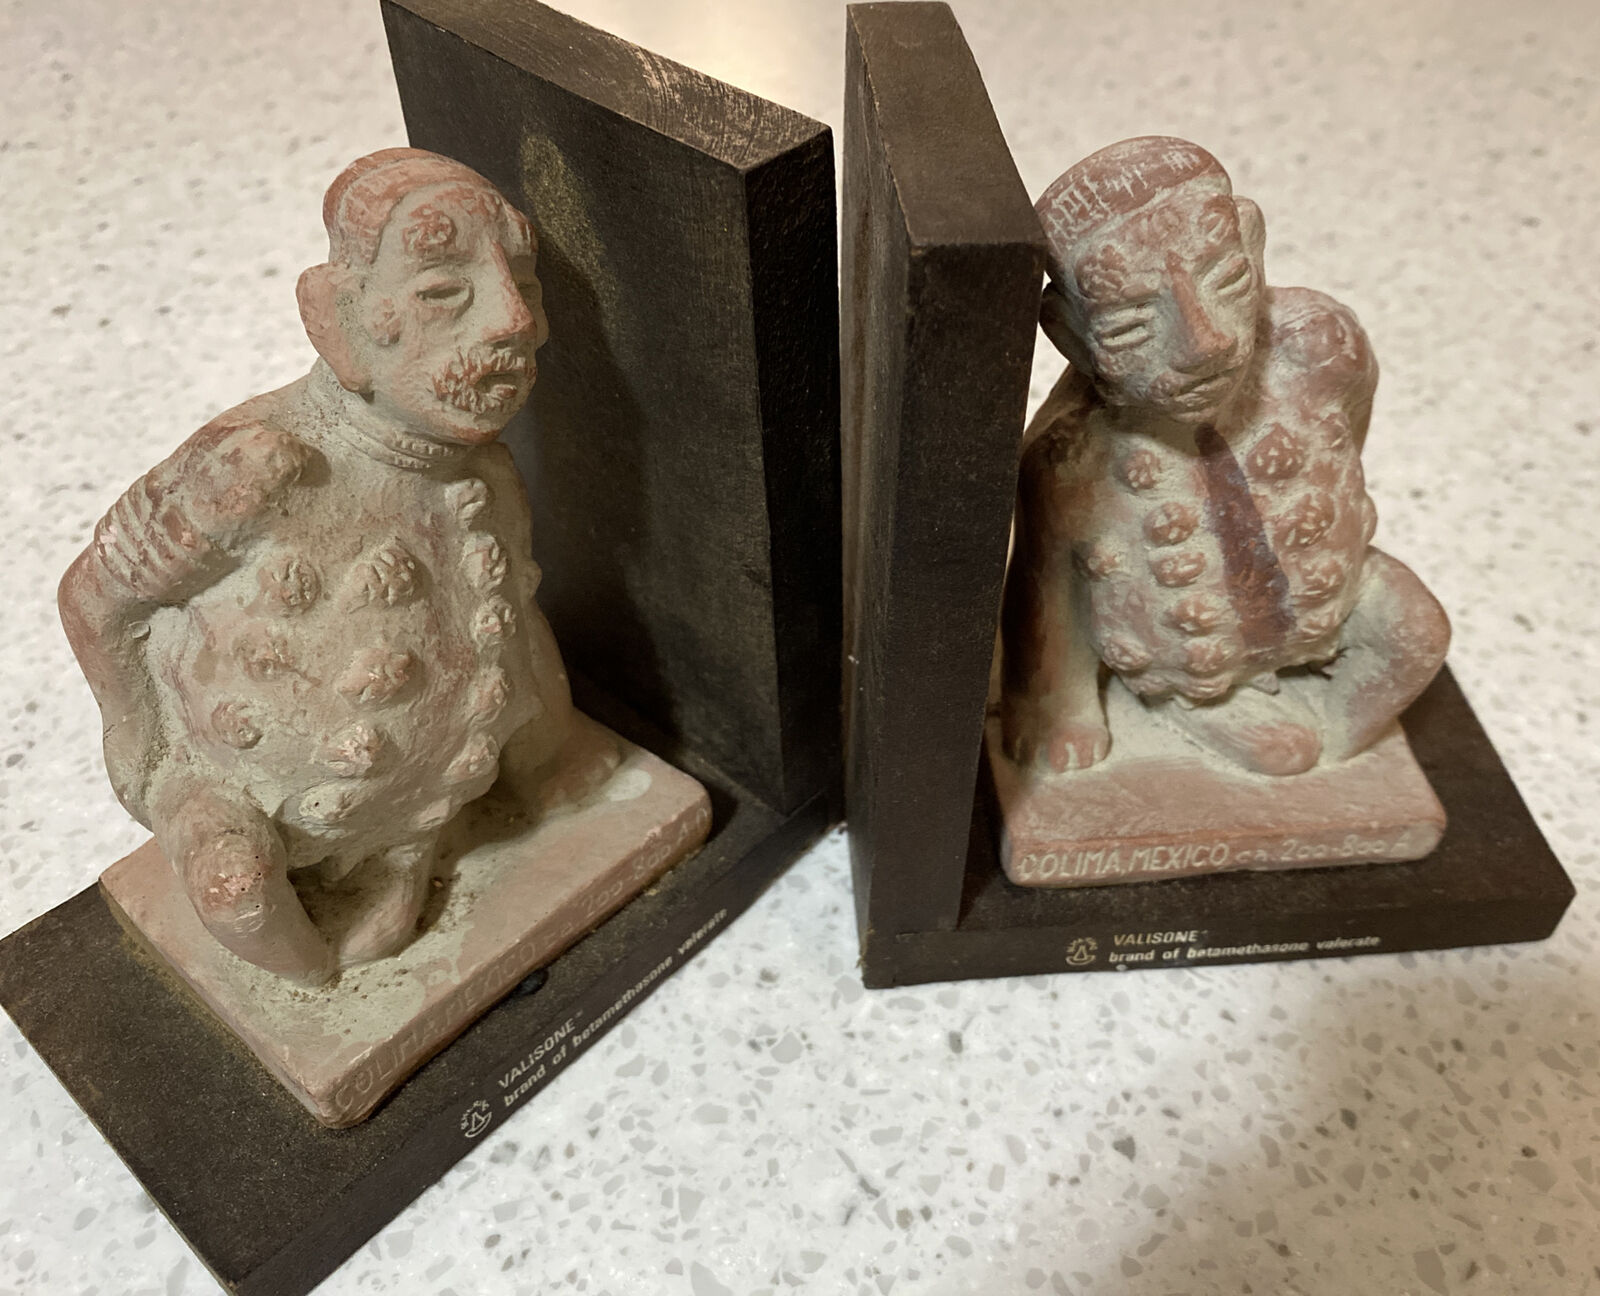 Shearing Pharmaceutical Advertising Bookends Pre-Colombian Repro Clay Sculptures